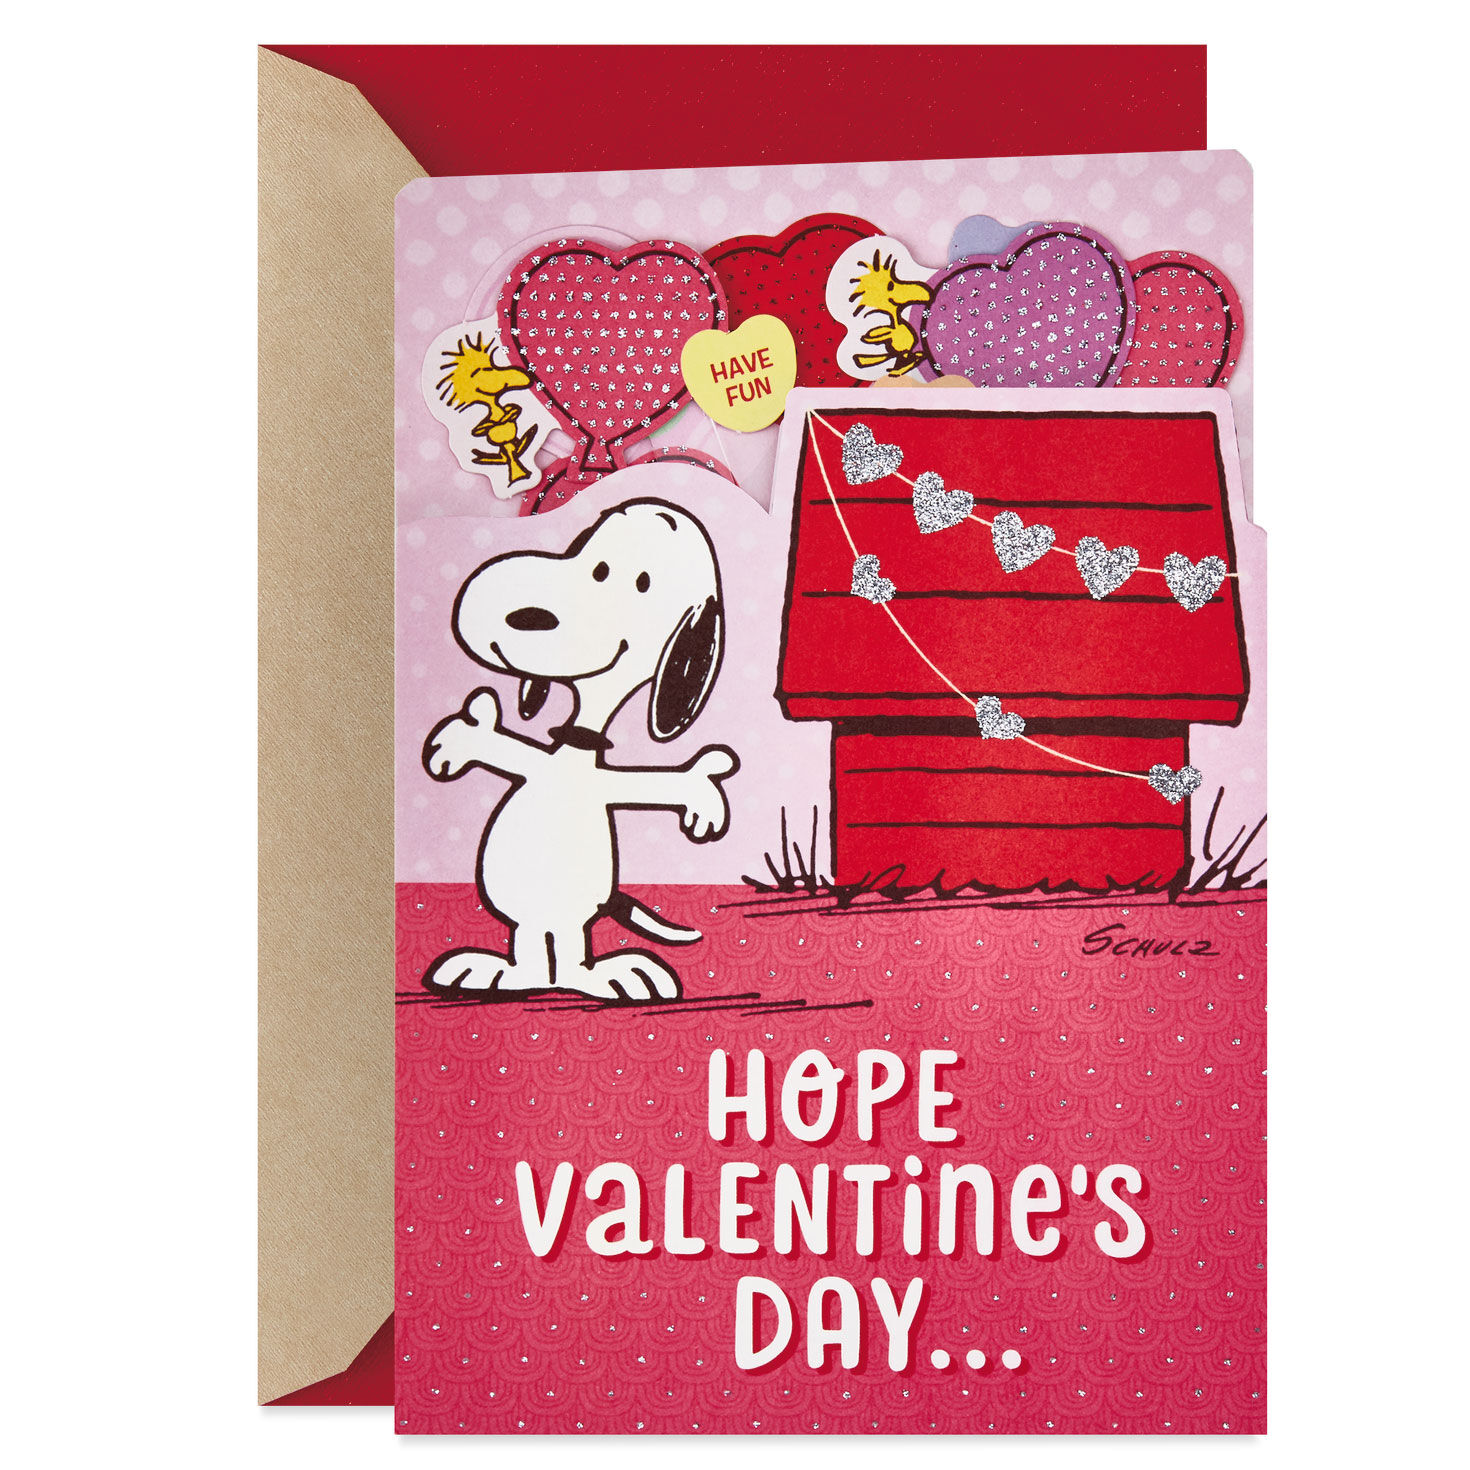 Peanuts® Snoopy and Woodstock Pop-Up Valentine's Day Card